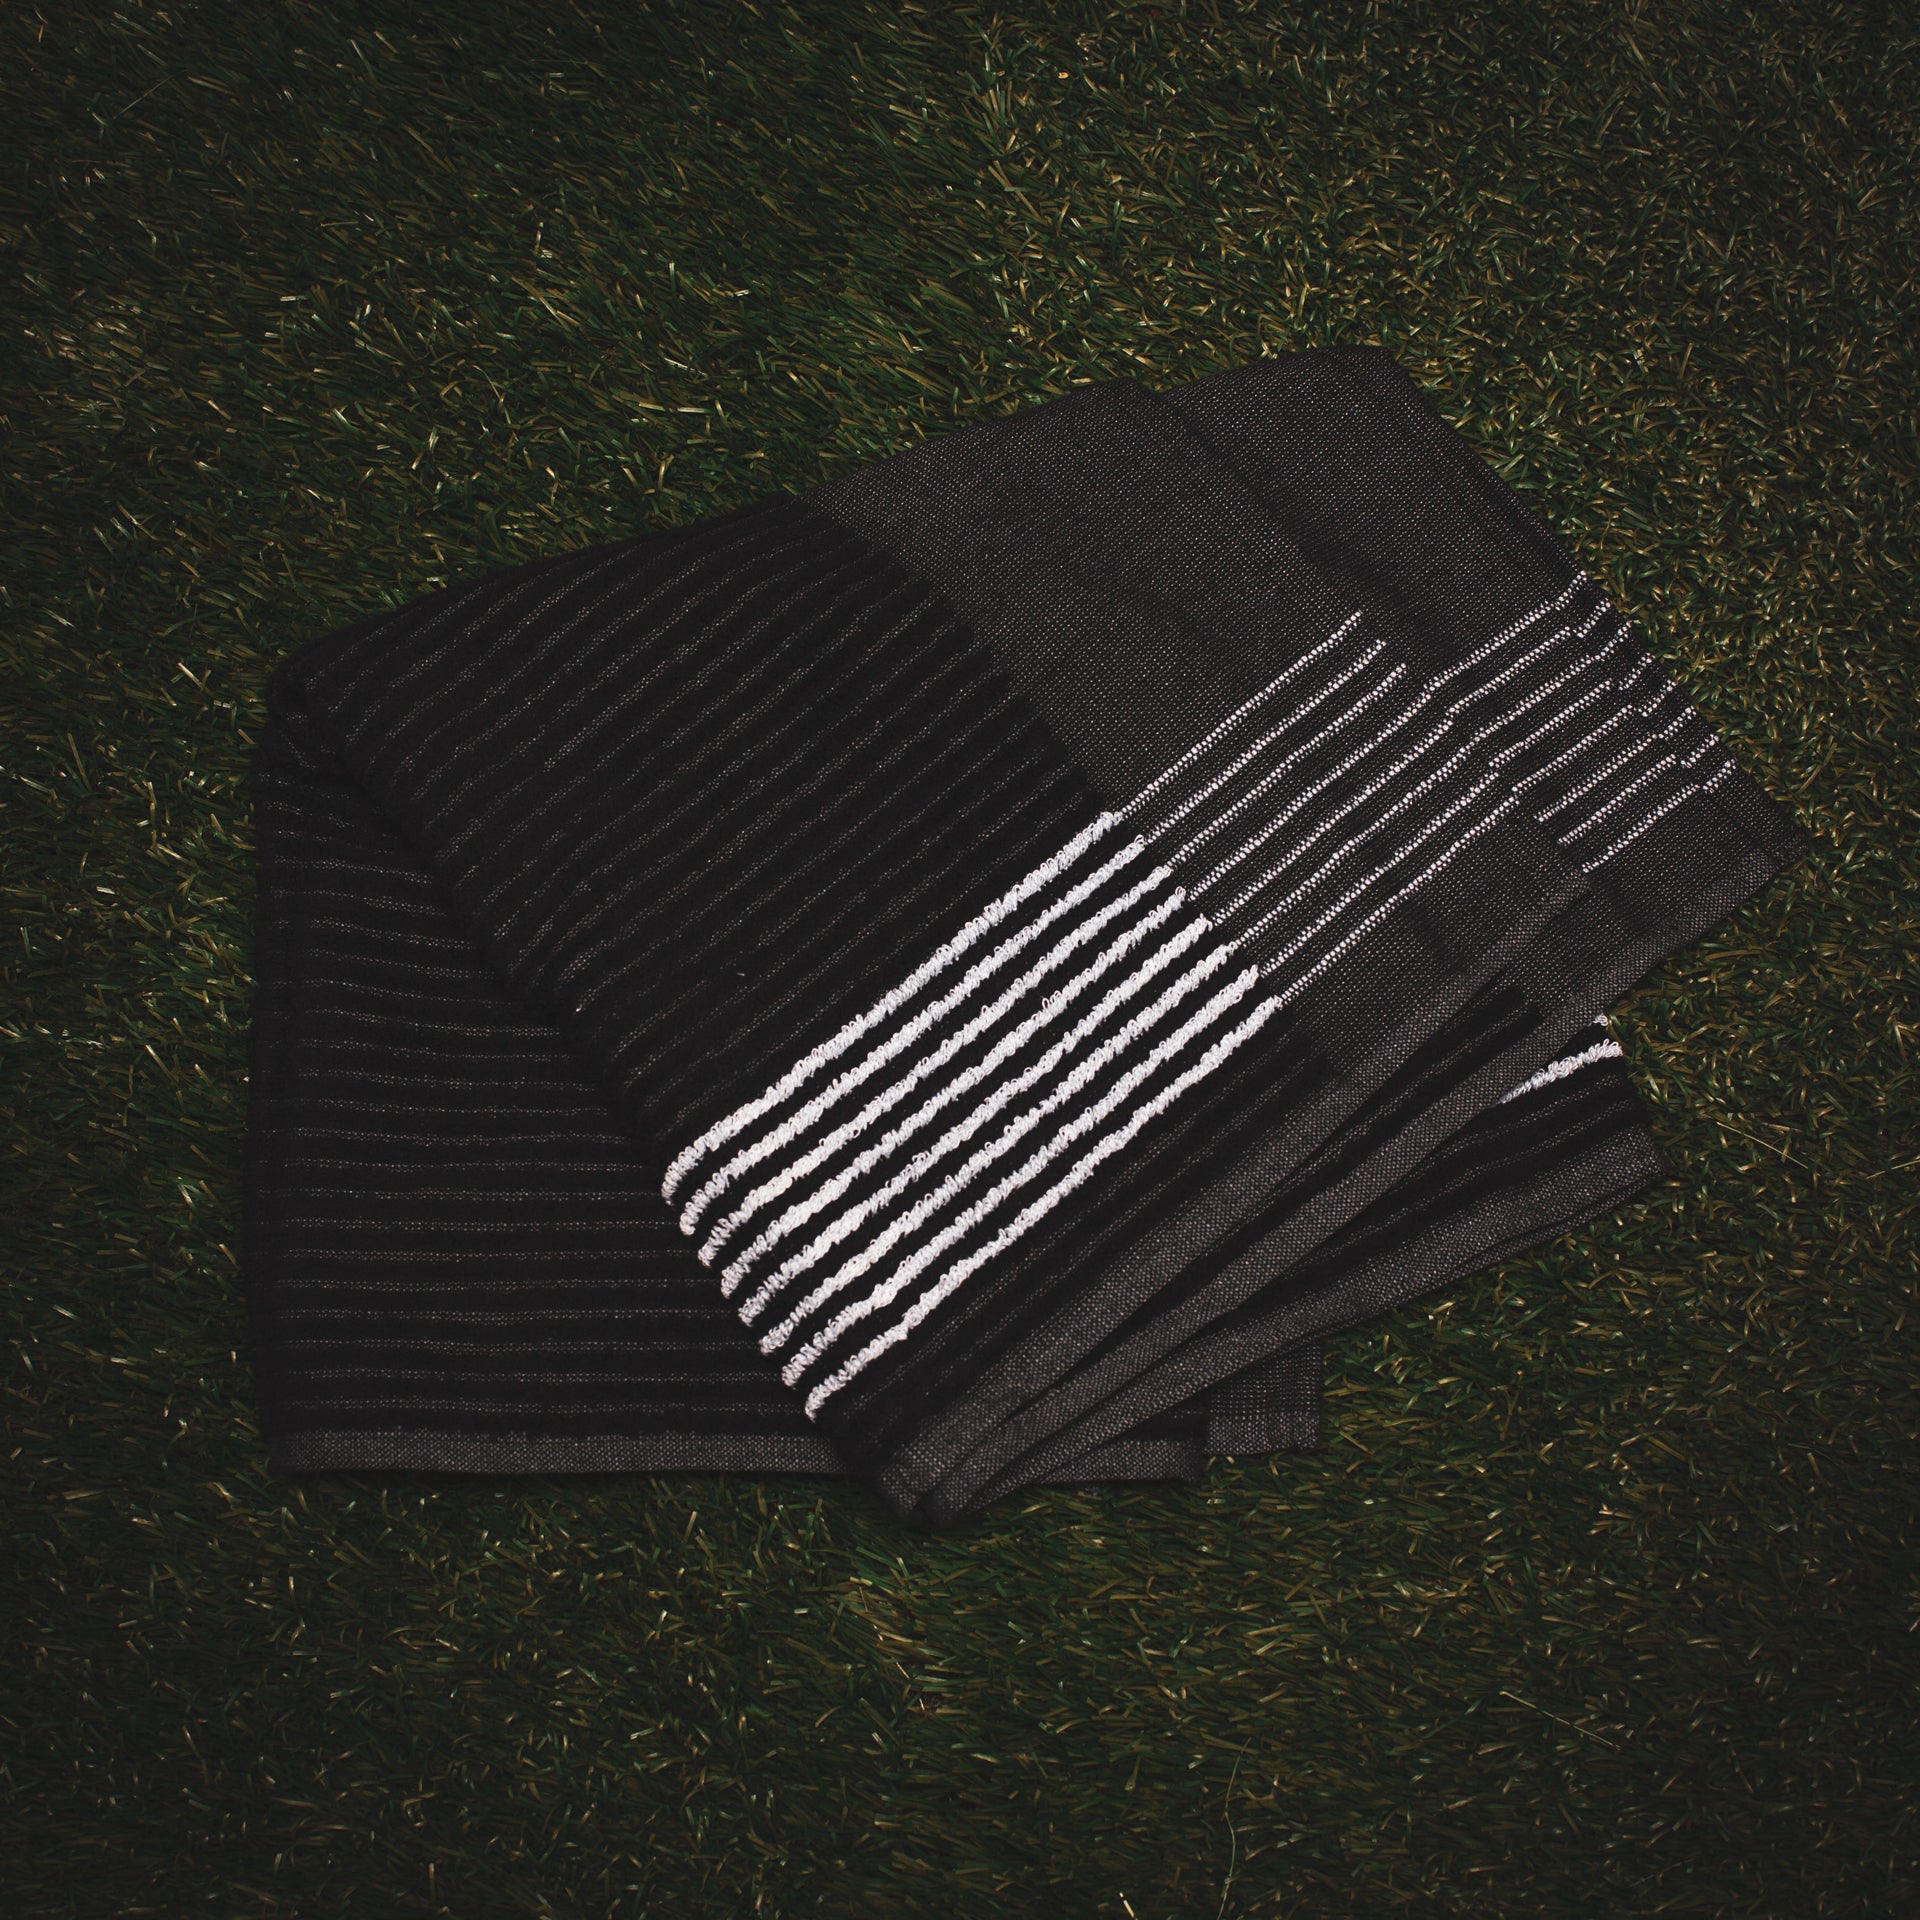 Black Caddy Towel with white stripes from cayce golf laying on the grass (2445375832143)